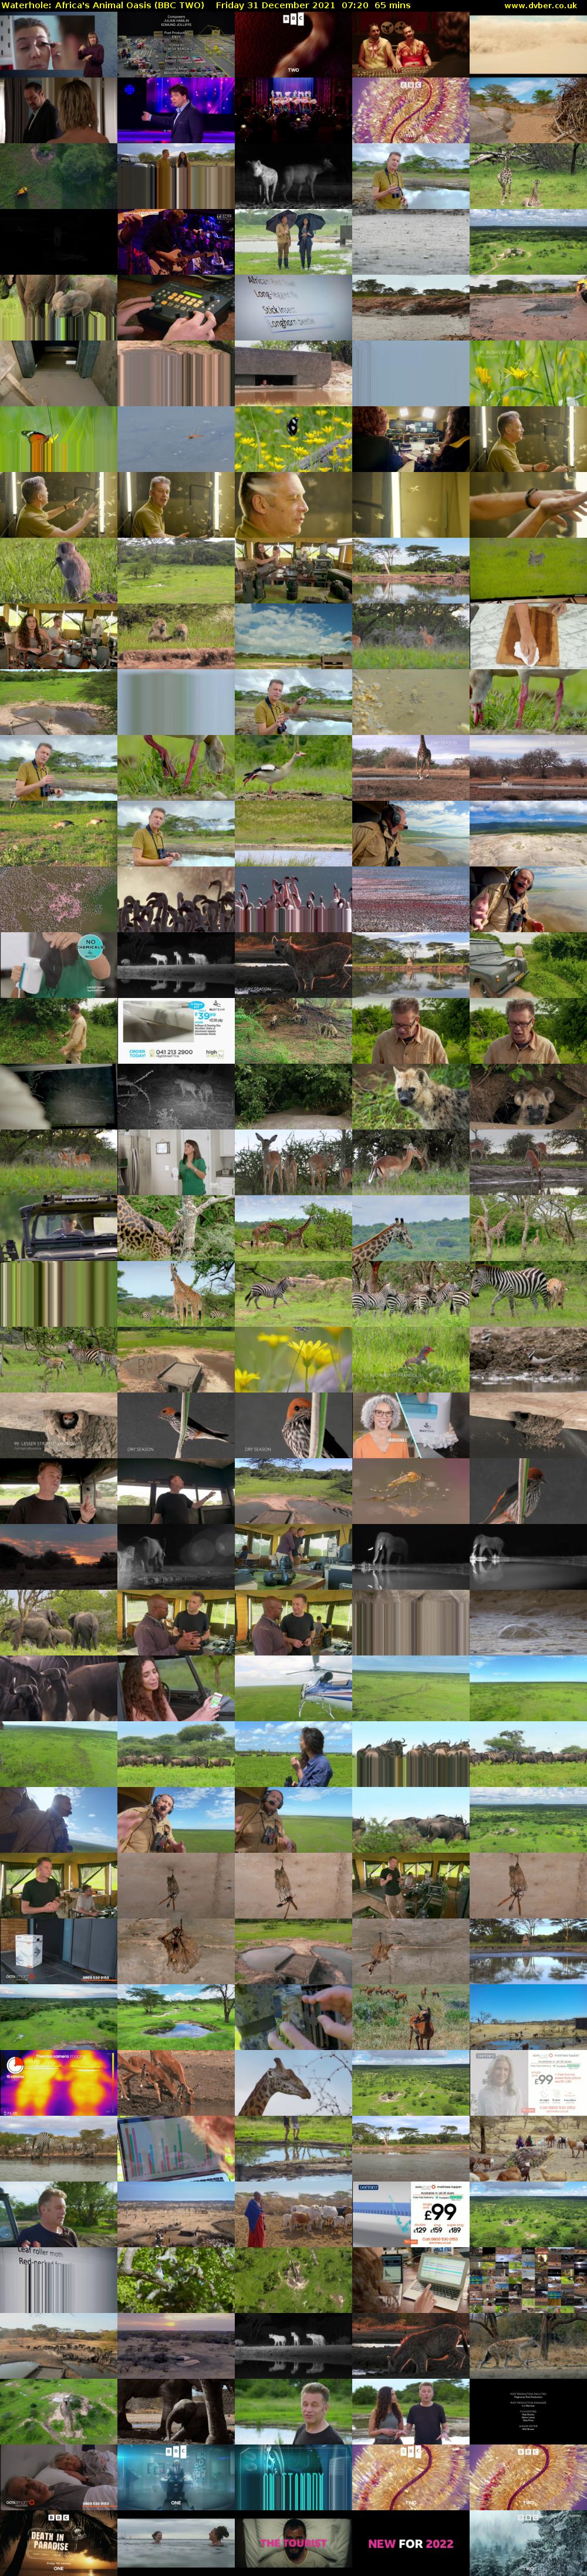 Waterhole: Africa's Animal Oasis (BBC TWO) Friday 31 December 2021 07:20 - 08:25